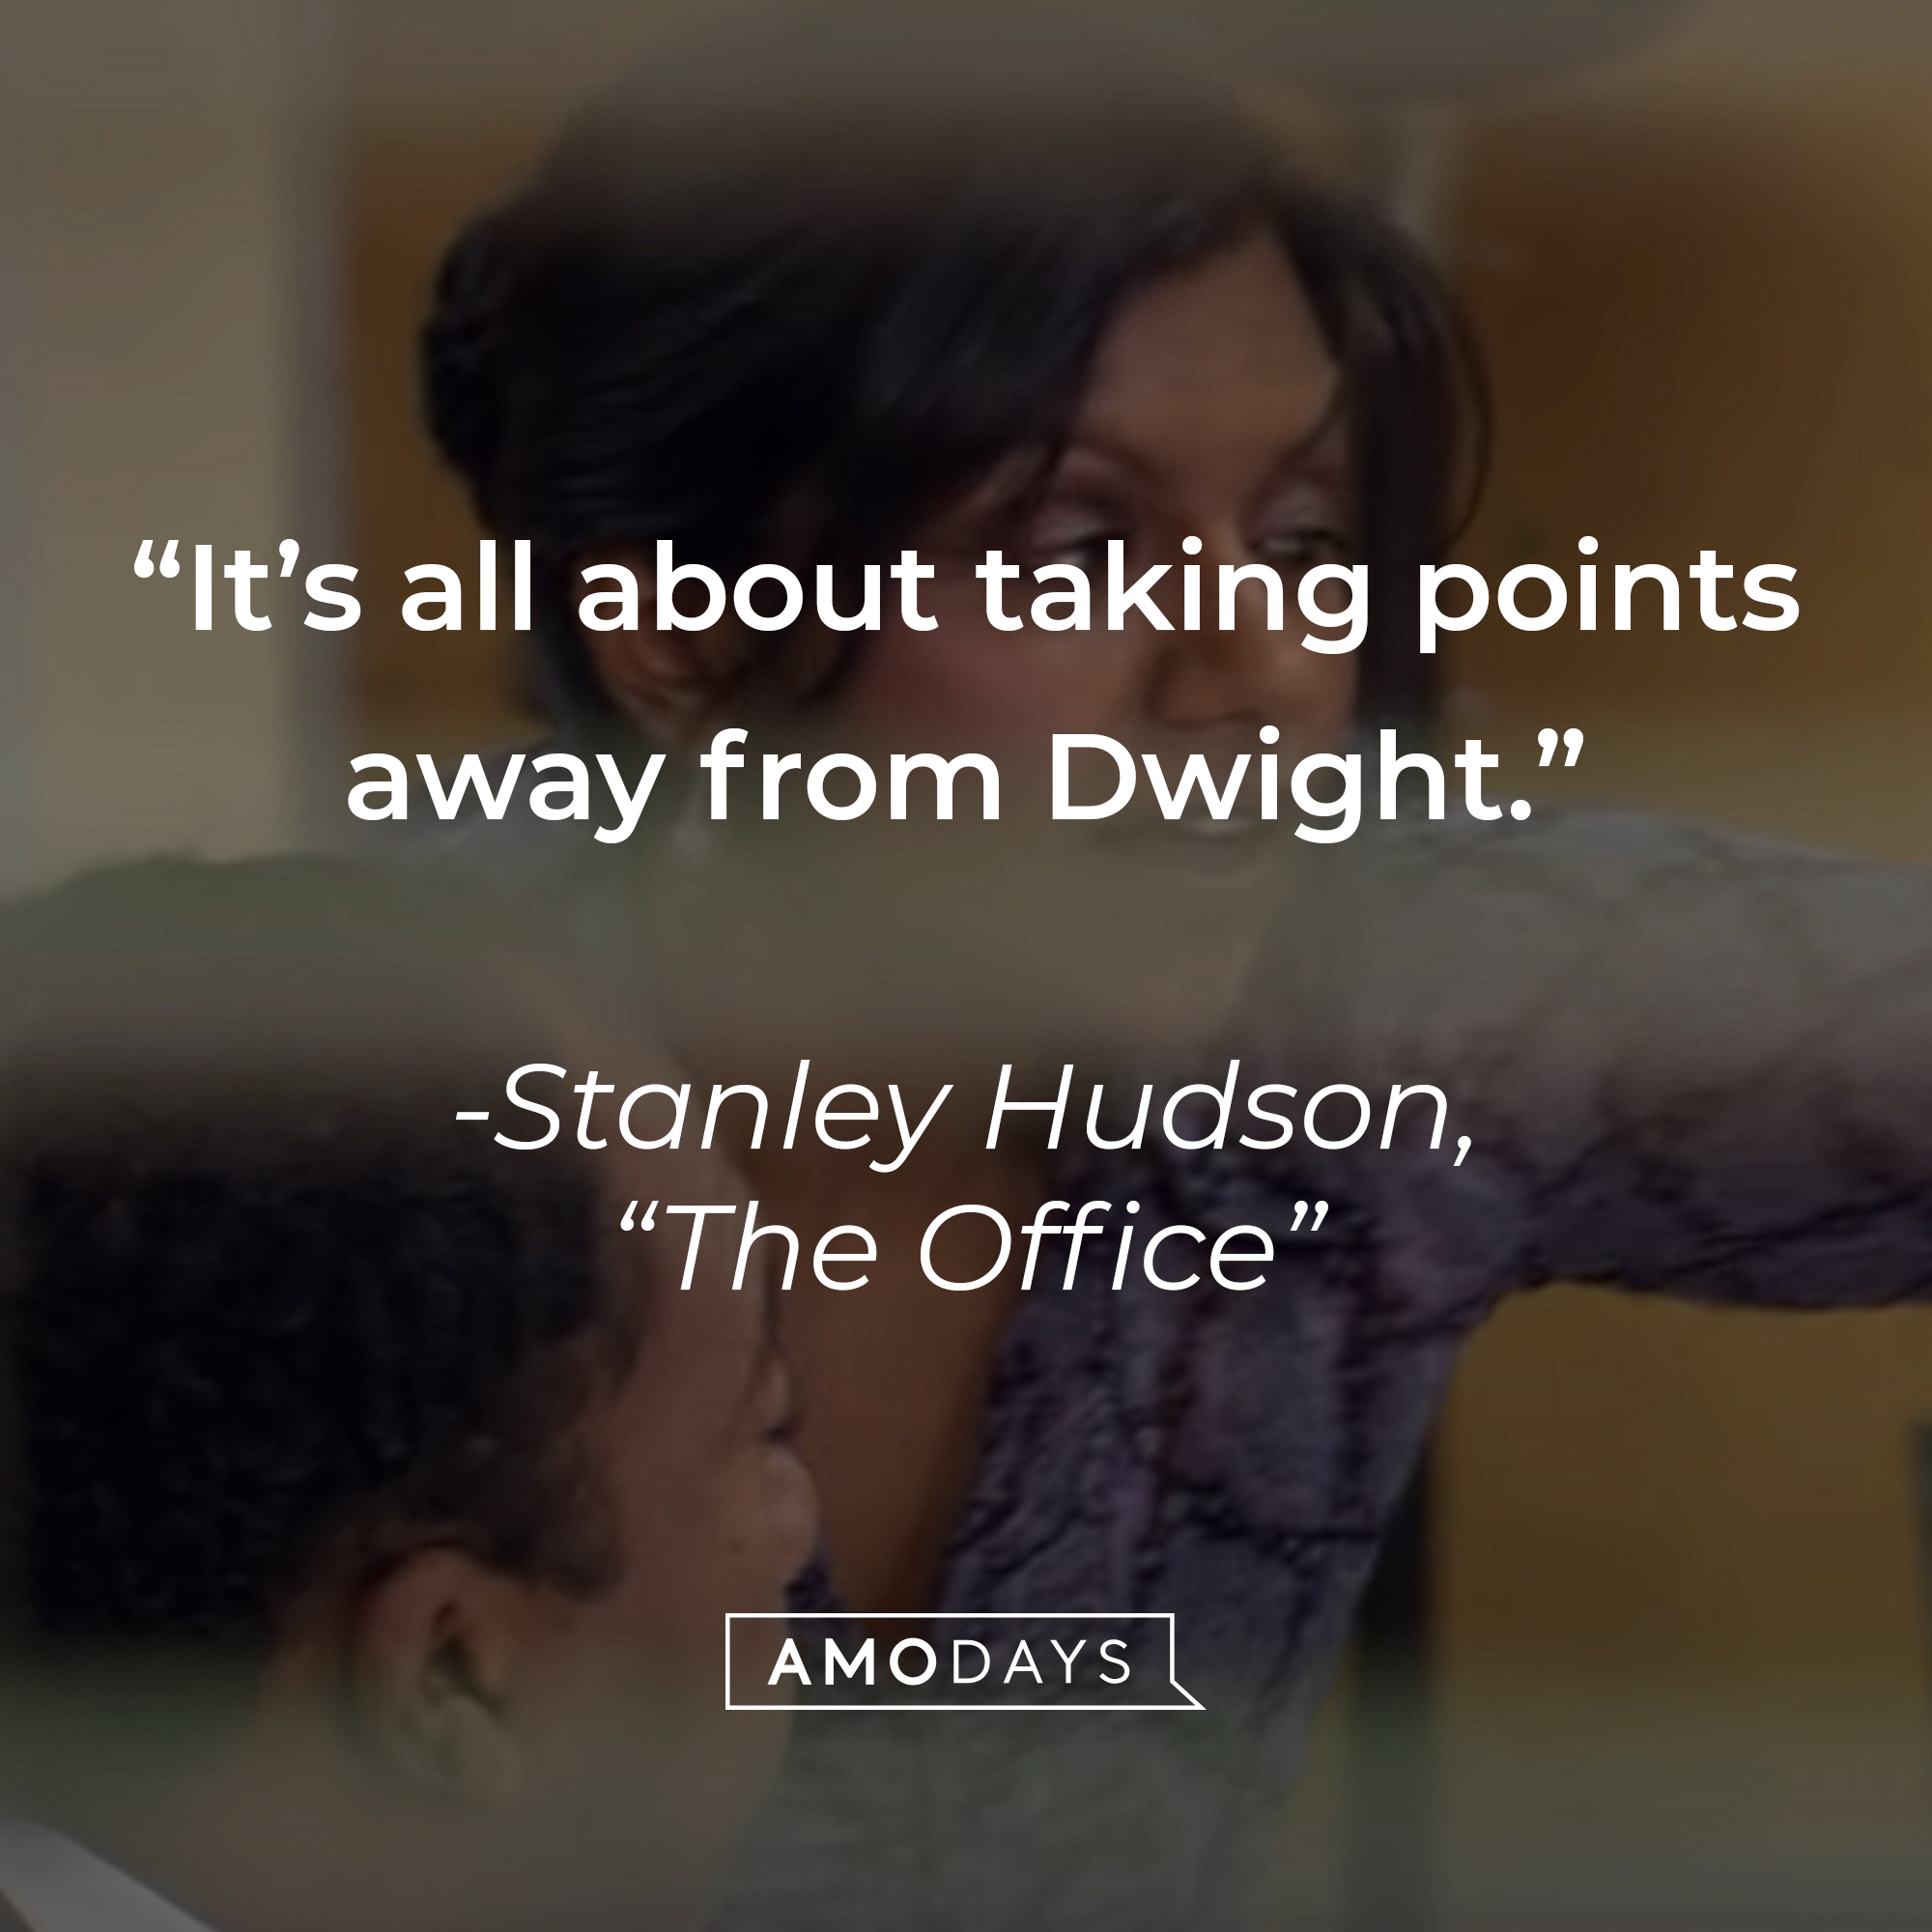 An image of Leslie David Baker as Stanley Hudson in "The Office" with the quote: "It’s all about taking points away from Dwight." | Source: youtube.com/The Office